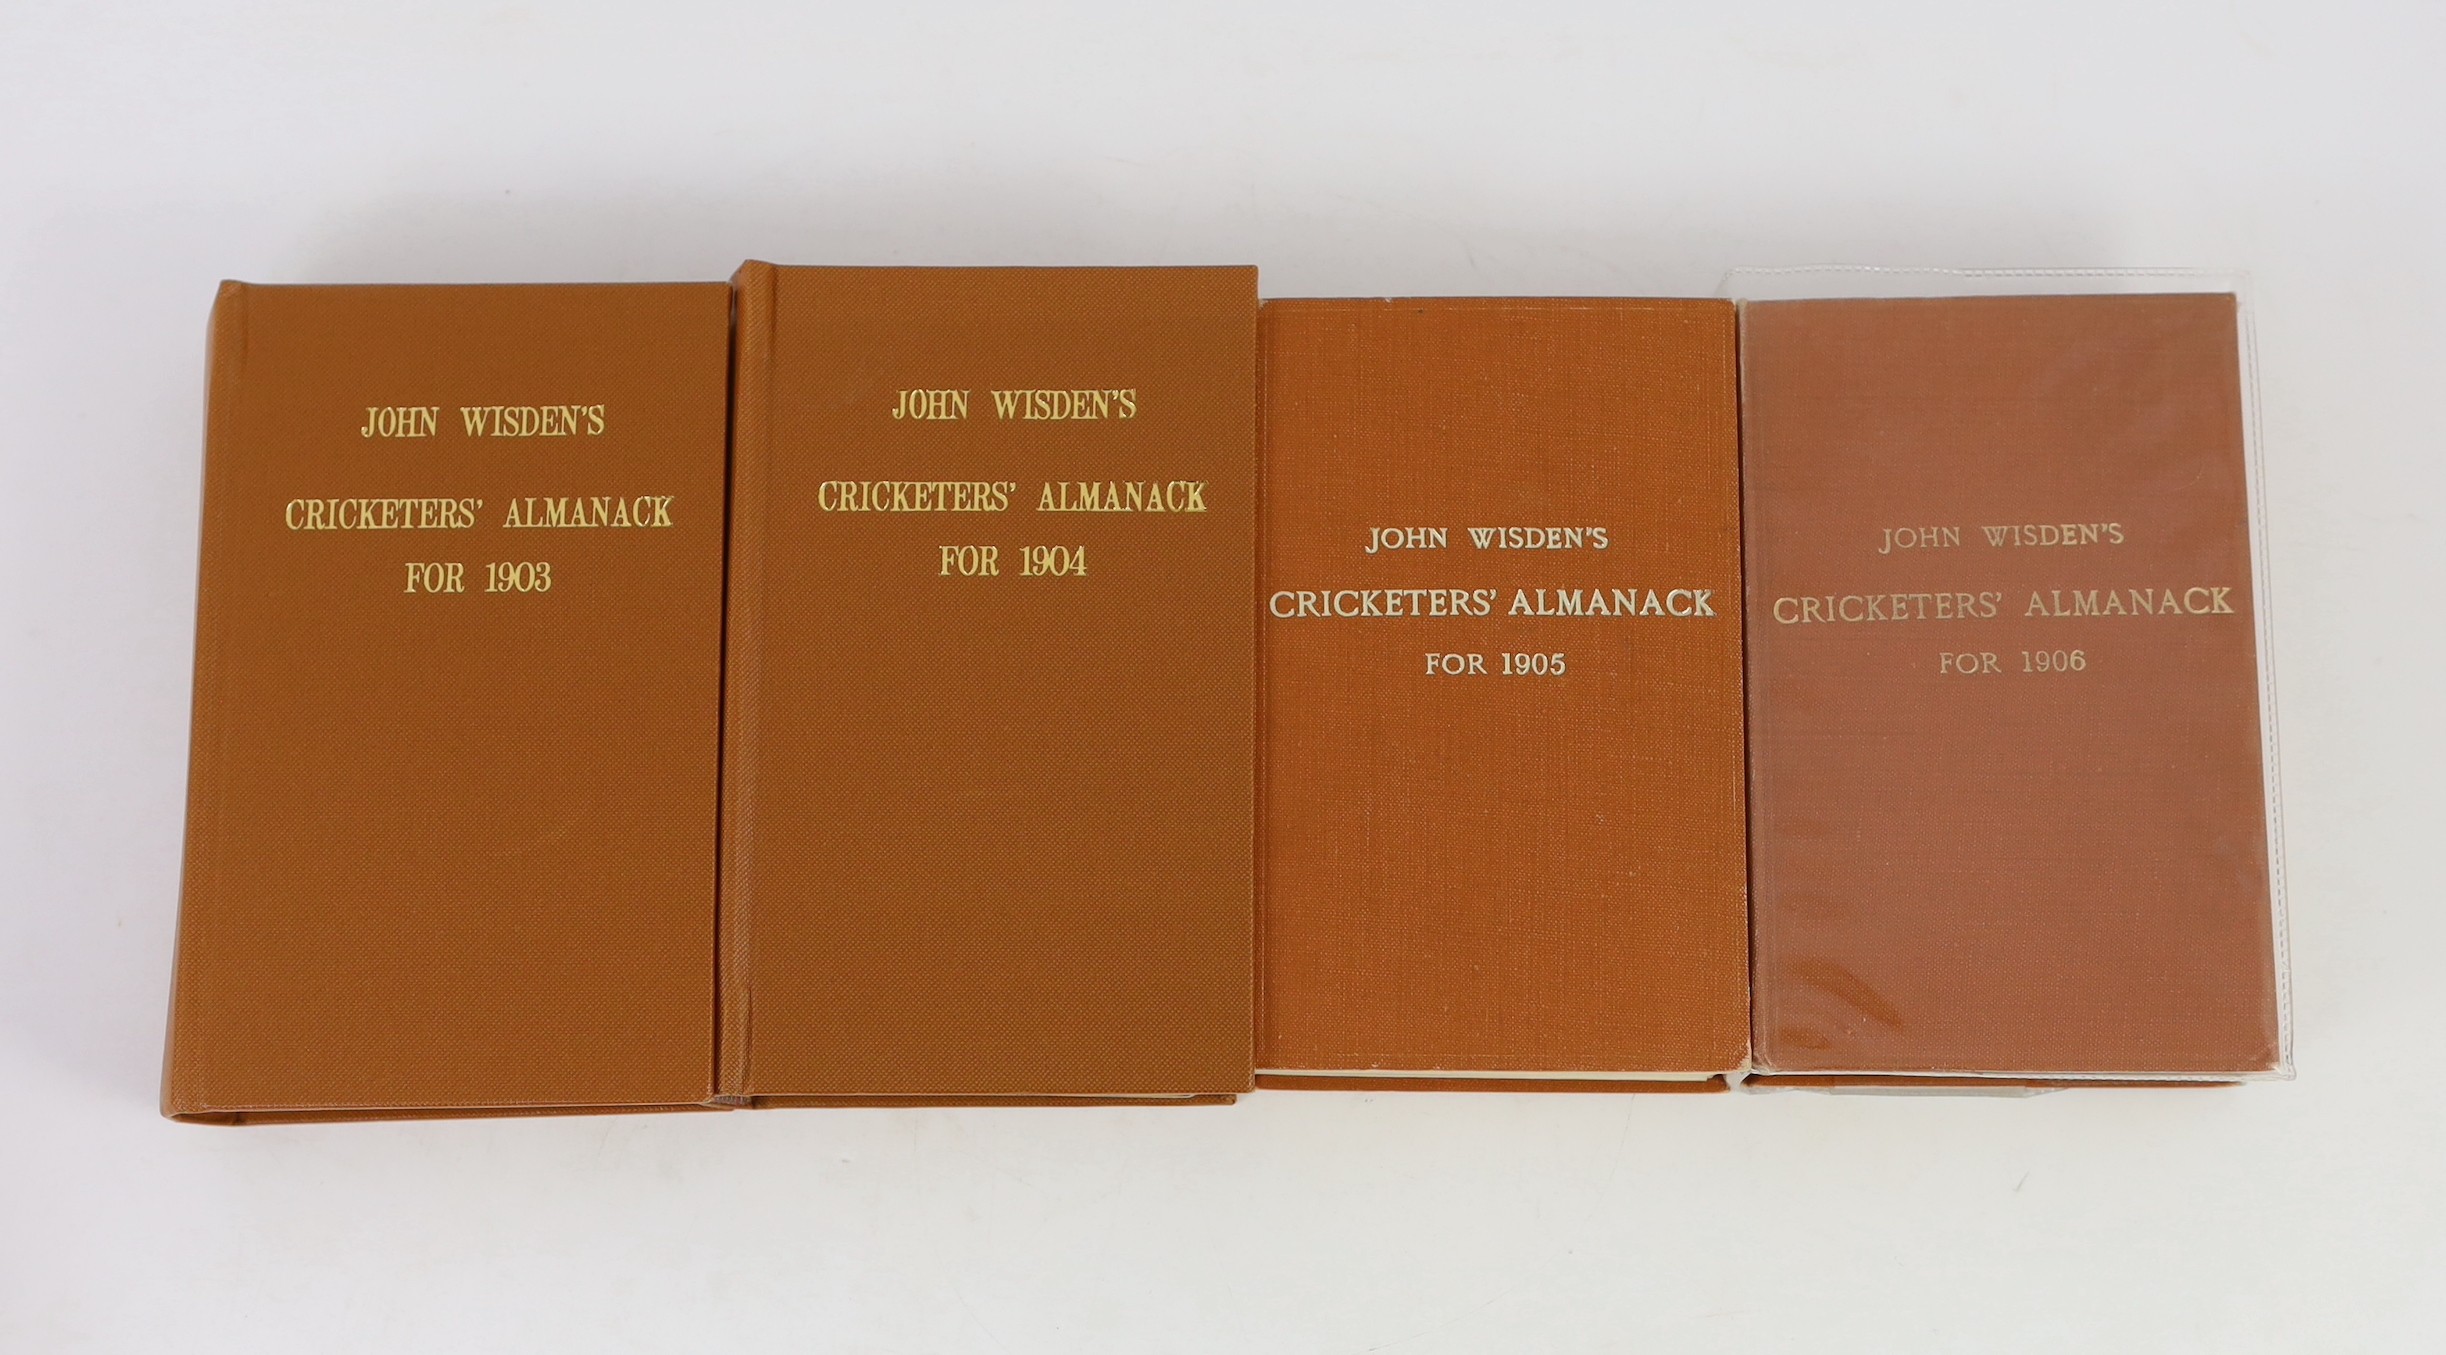 Wisden, John - Cricketers’ Almanack for the years, 1900 (37th edition) - 1906 (43rd edition), all rebound brown cloth gilt, and retaining original paper wrappers, loss to bottom left front wrapper to 40th edition of 1903